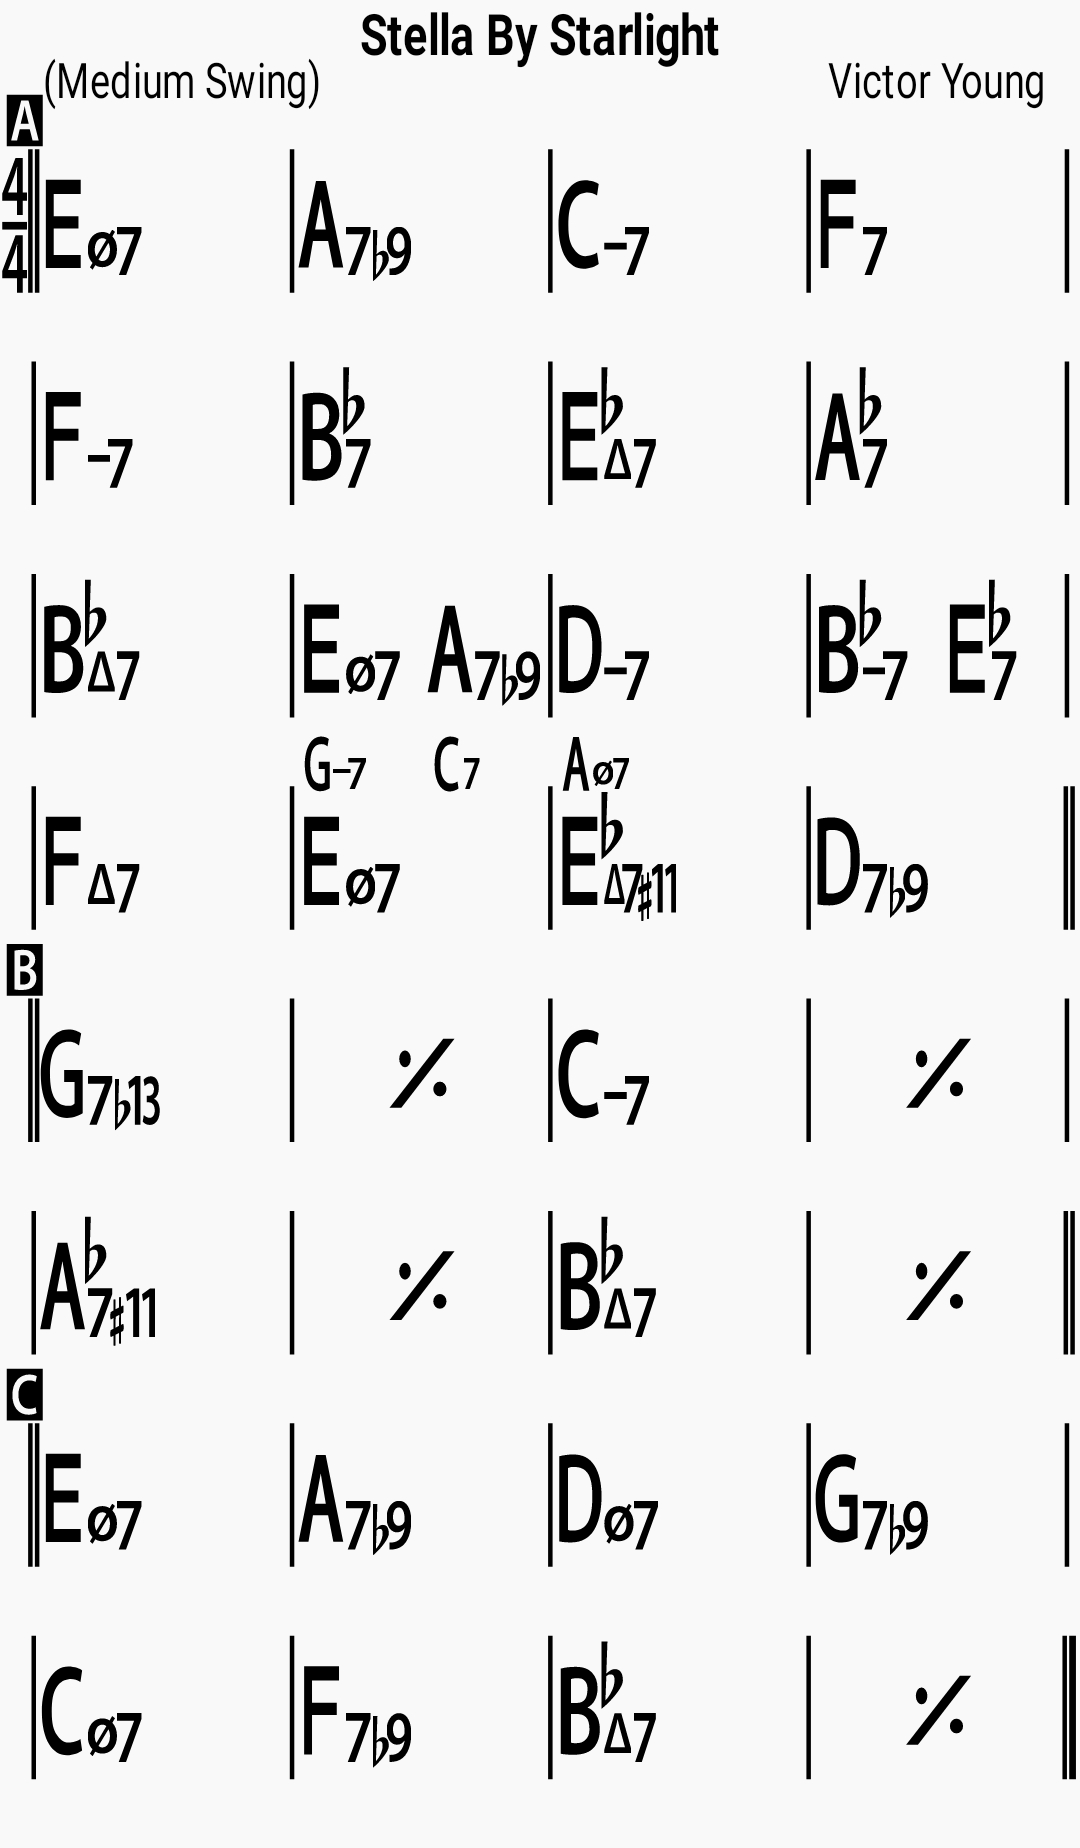 Chord chart for the jazz standard Stella By Starlight